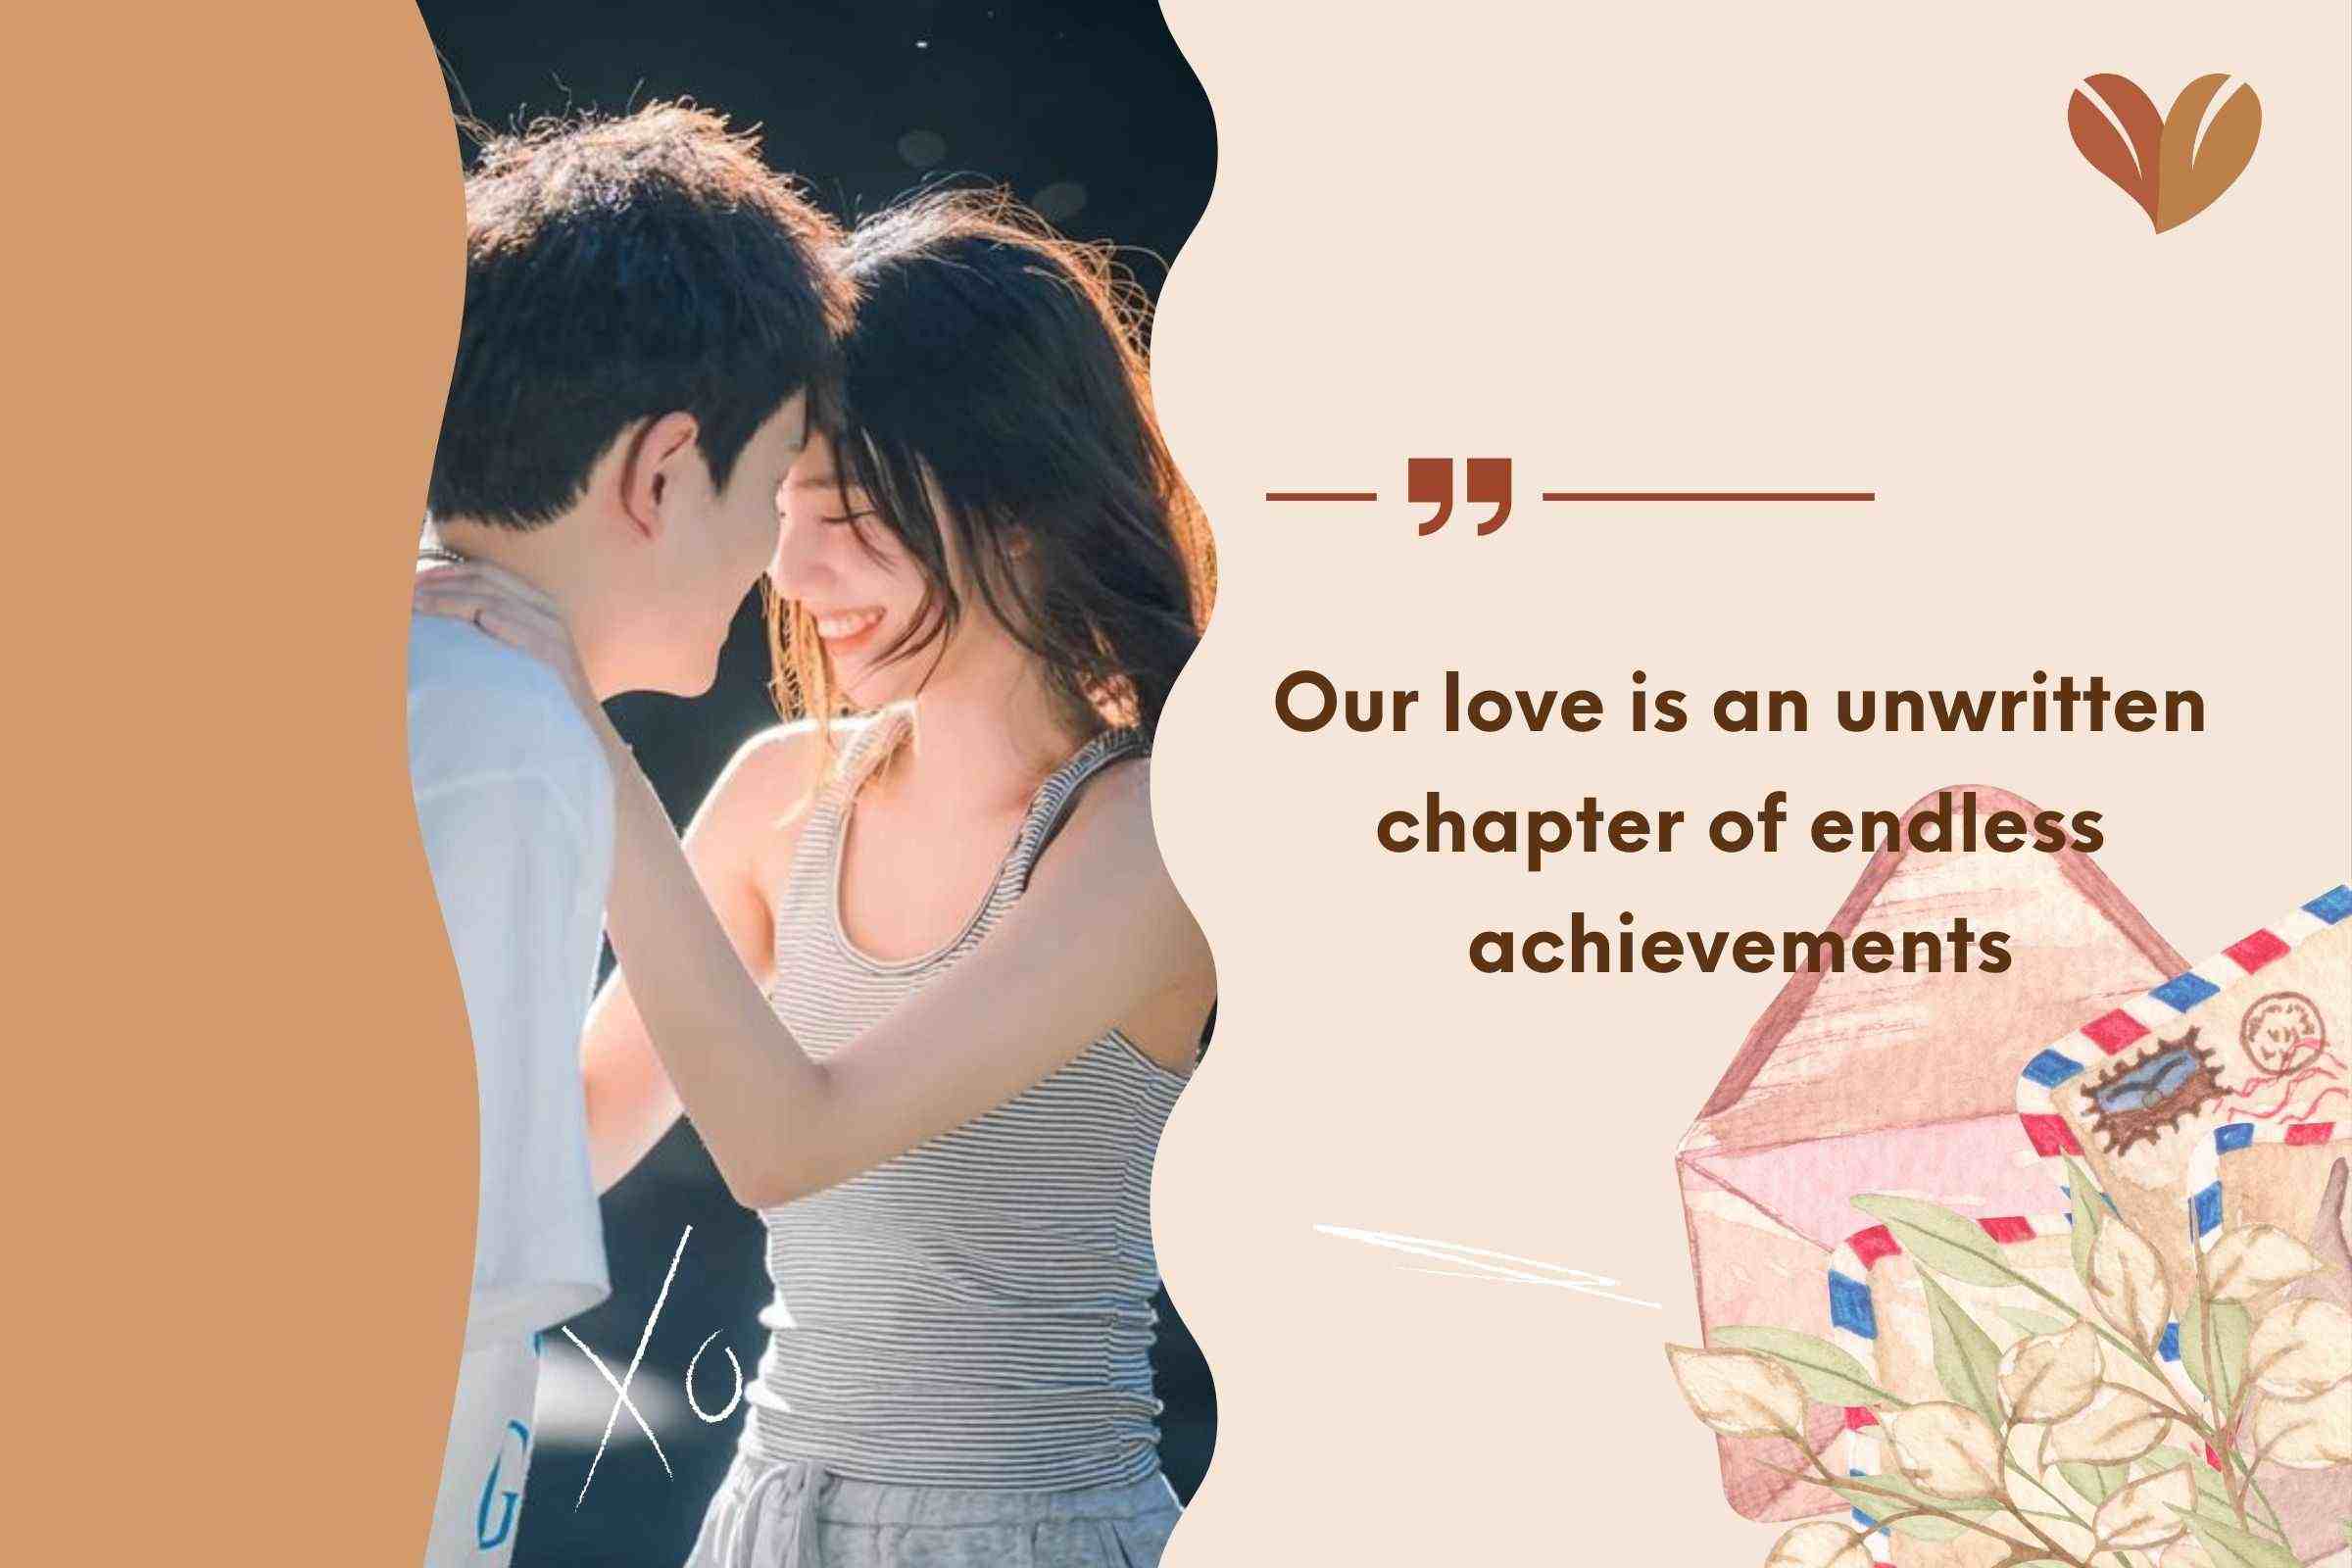 Our love is an unwritten chapter of endless achievements